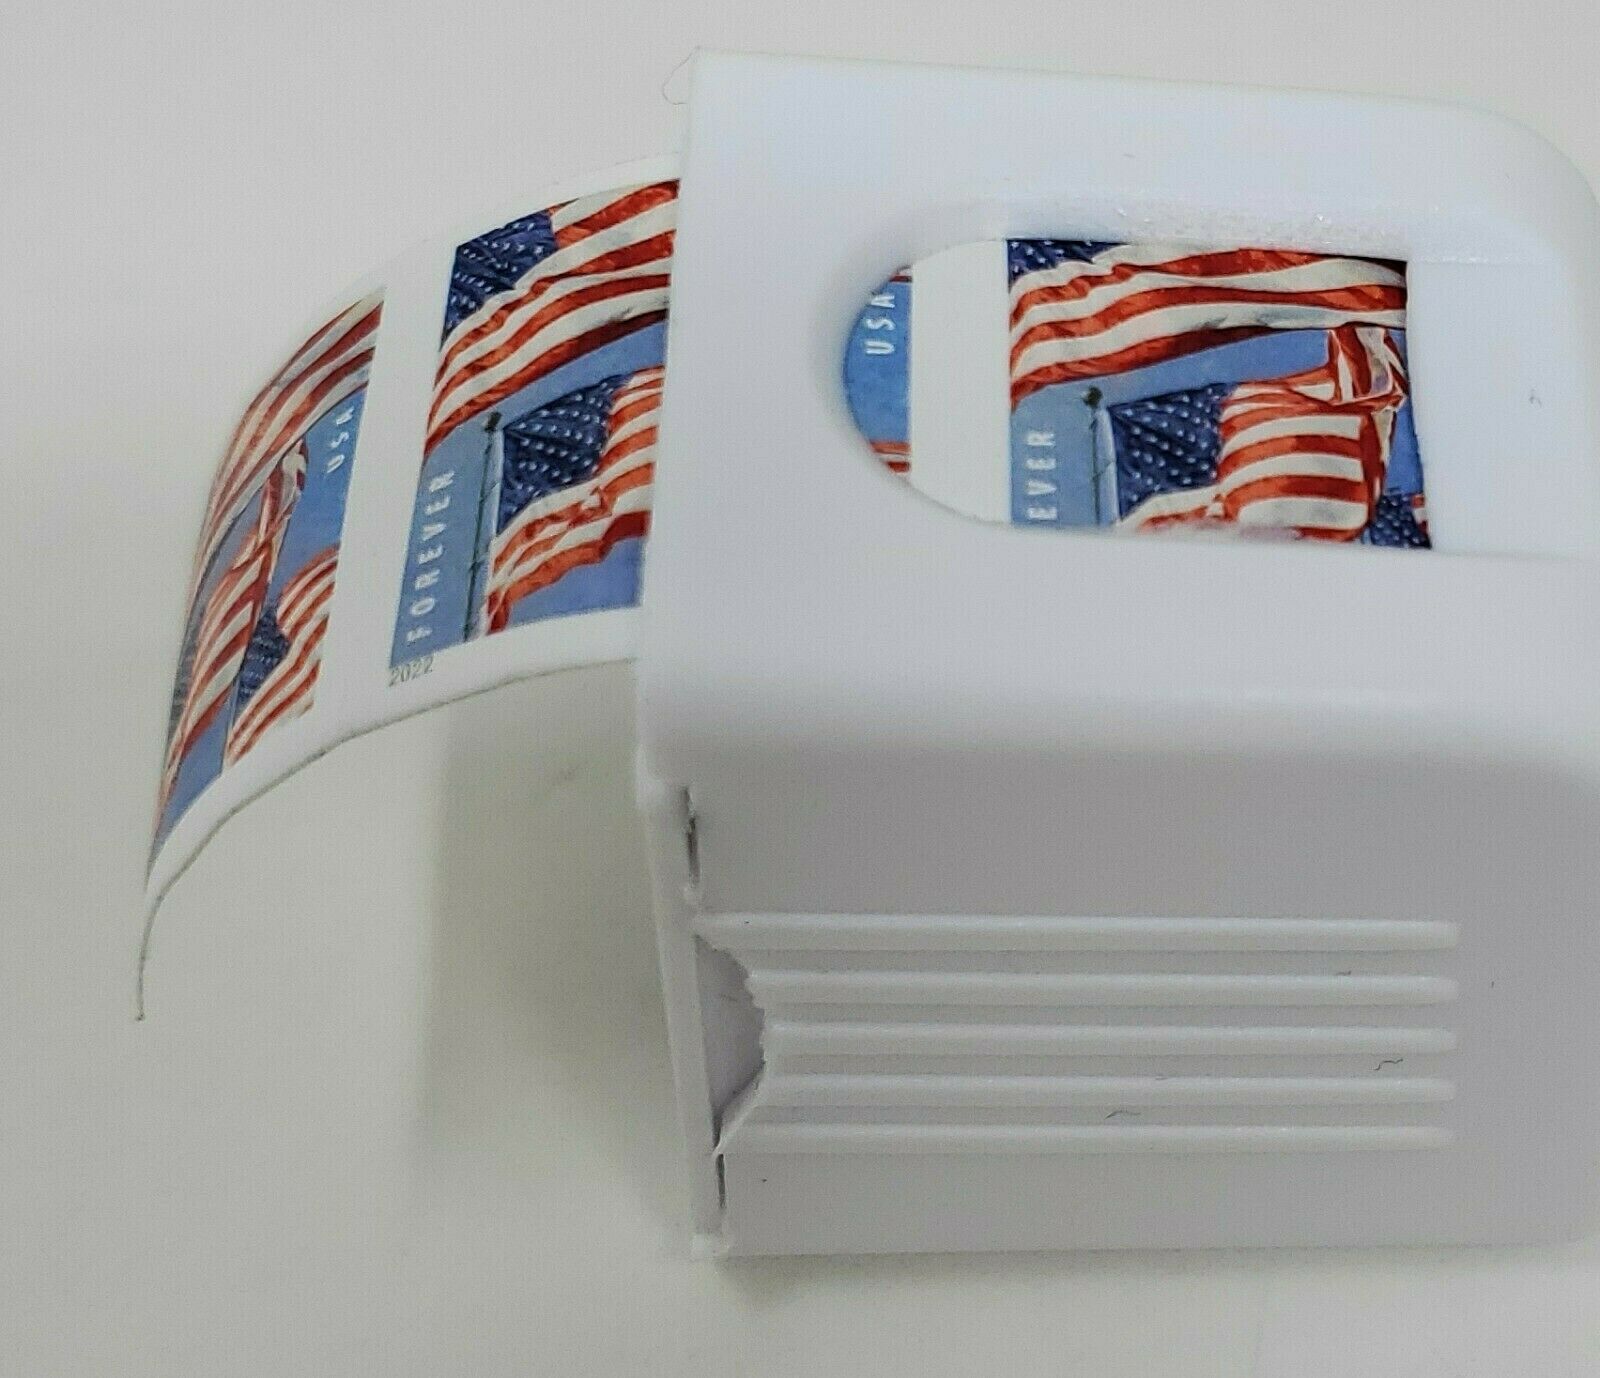 1 Roll of 100 Stamps USPS Forever Stamps U.S. Flag + Roll